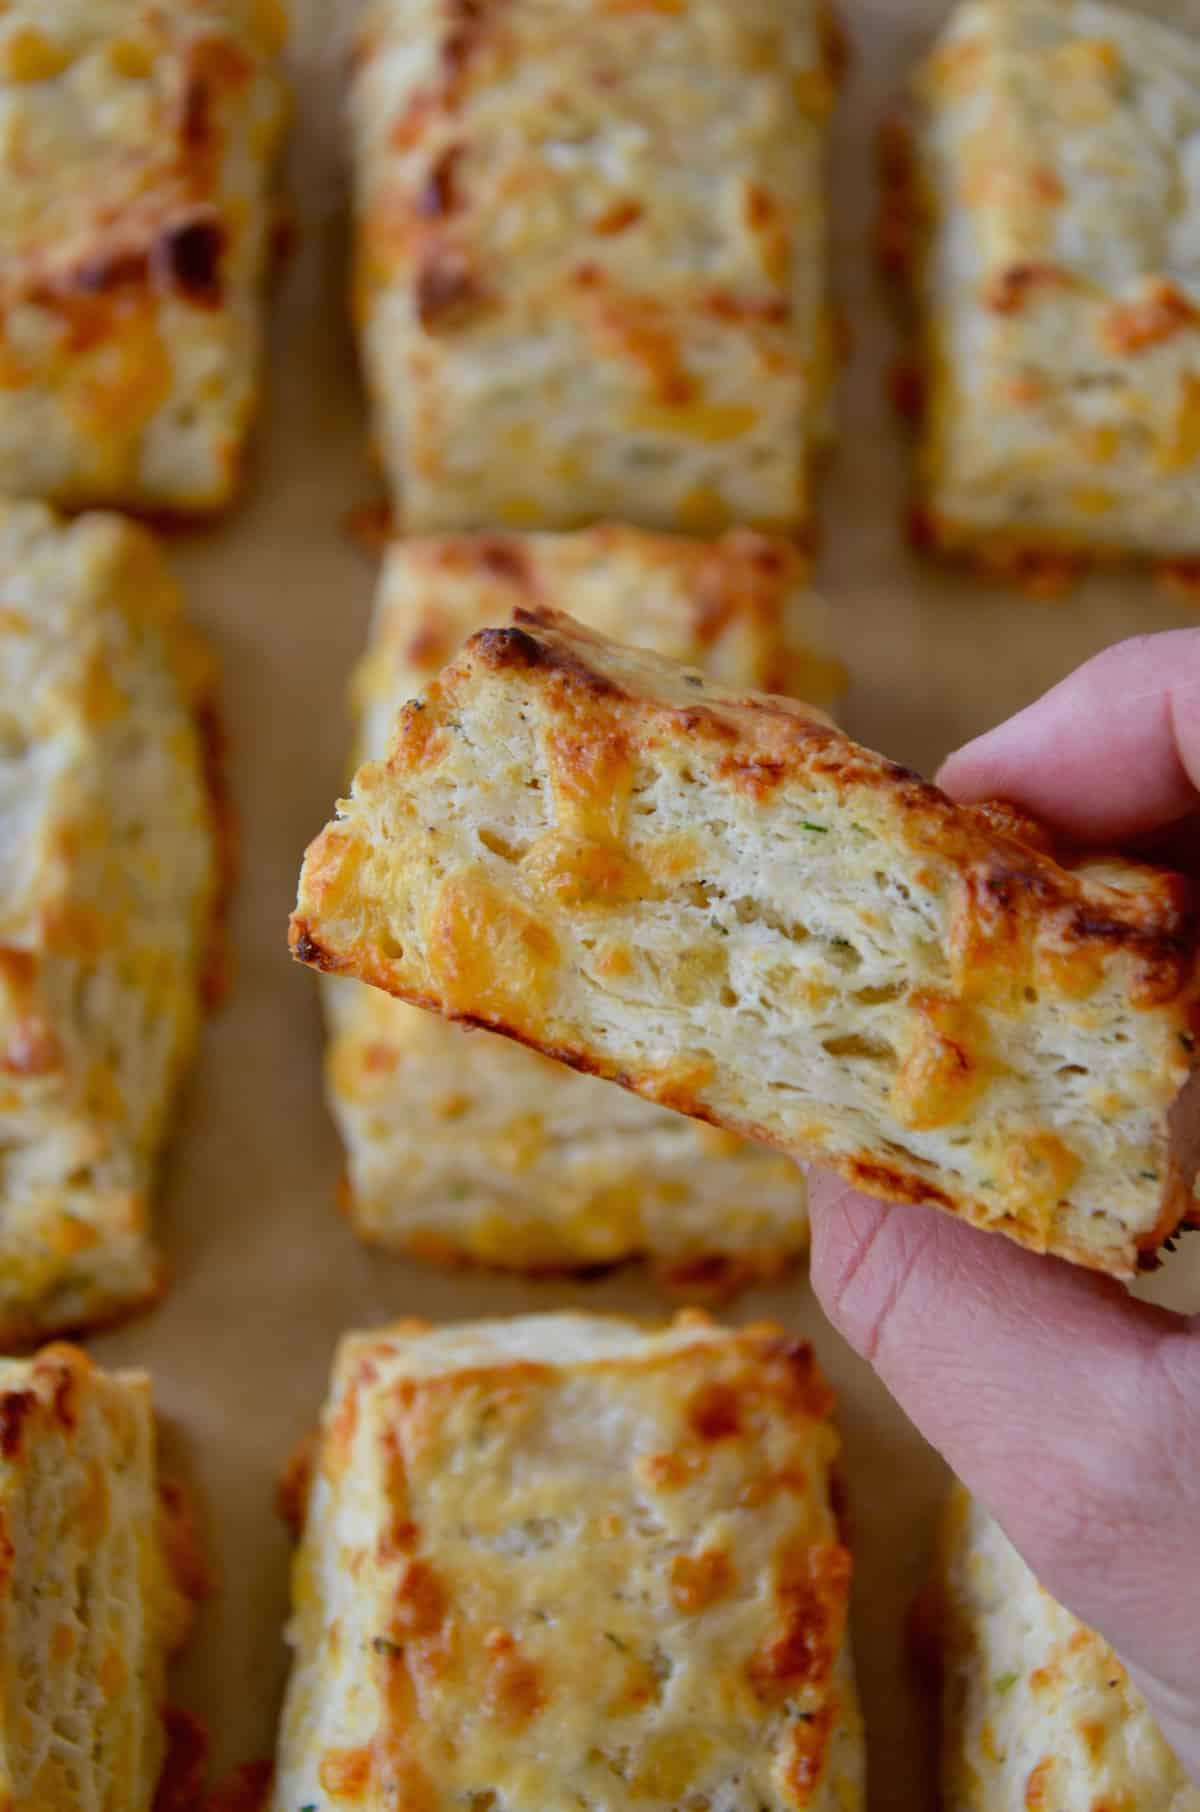 Fingers hold a cheddar herb biscuit, with rows of cheddar biscuits on parchment in the background.